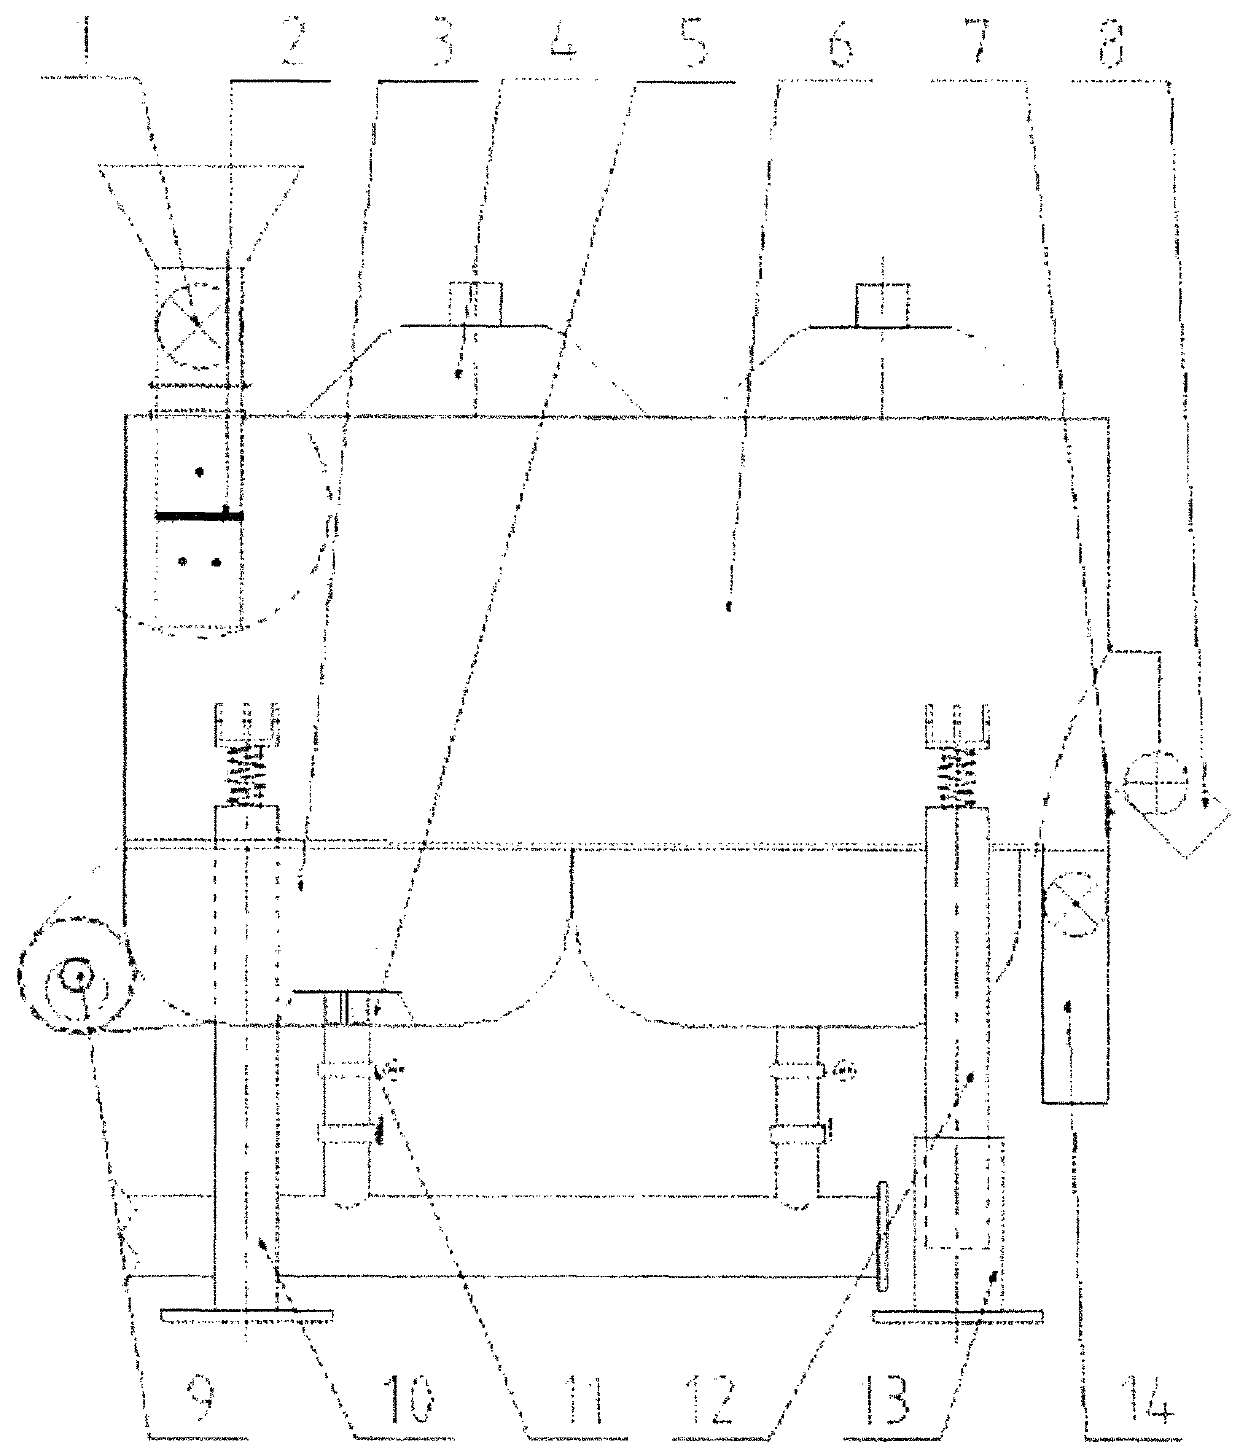 Drying and separation integrated machine for vibrating fluidized bed